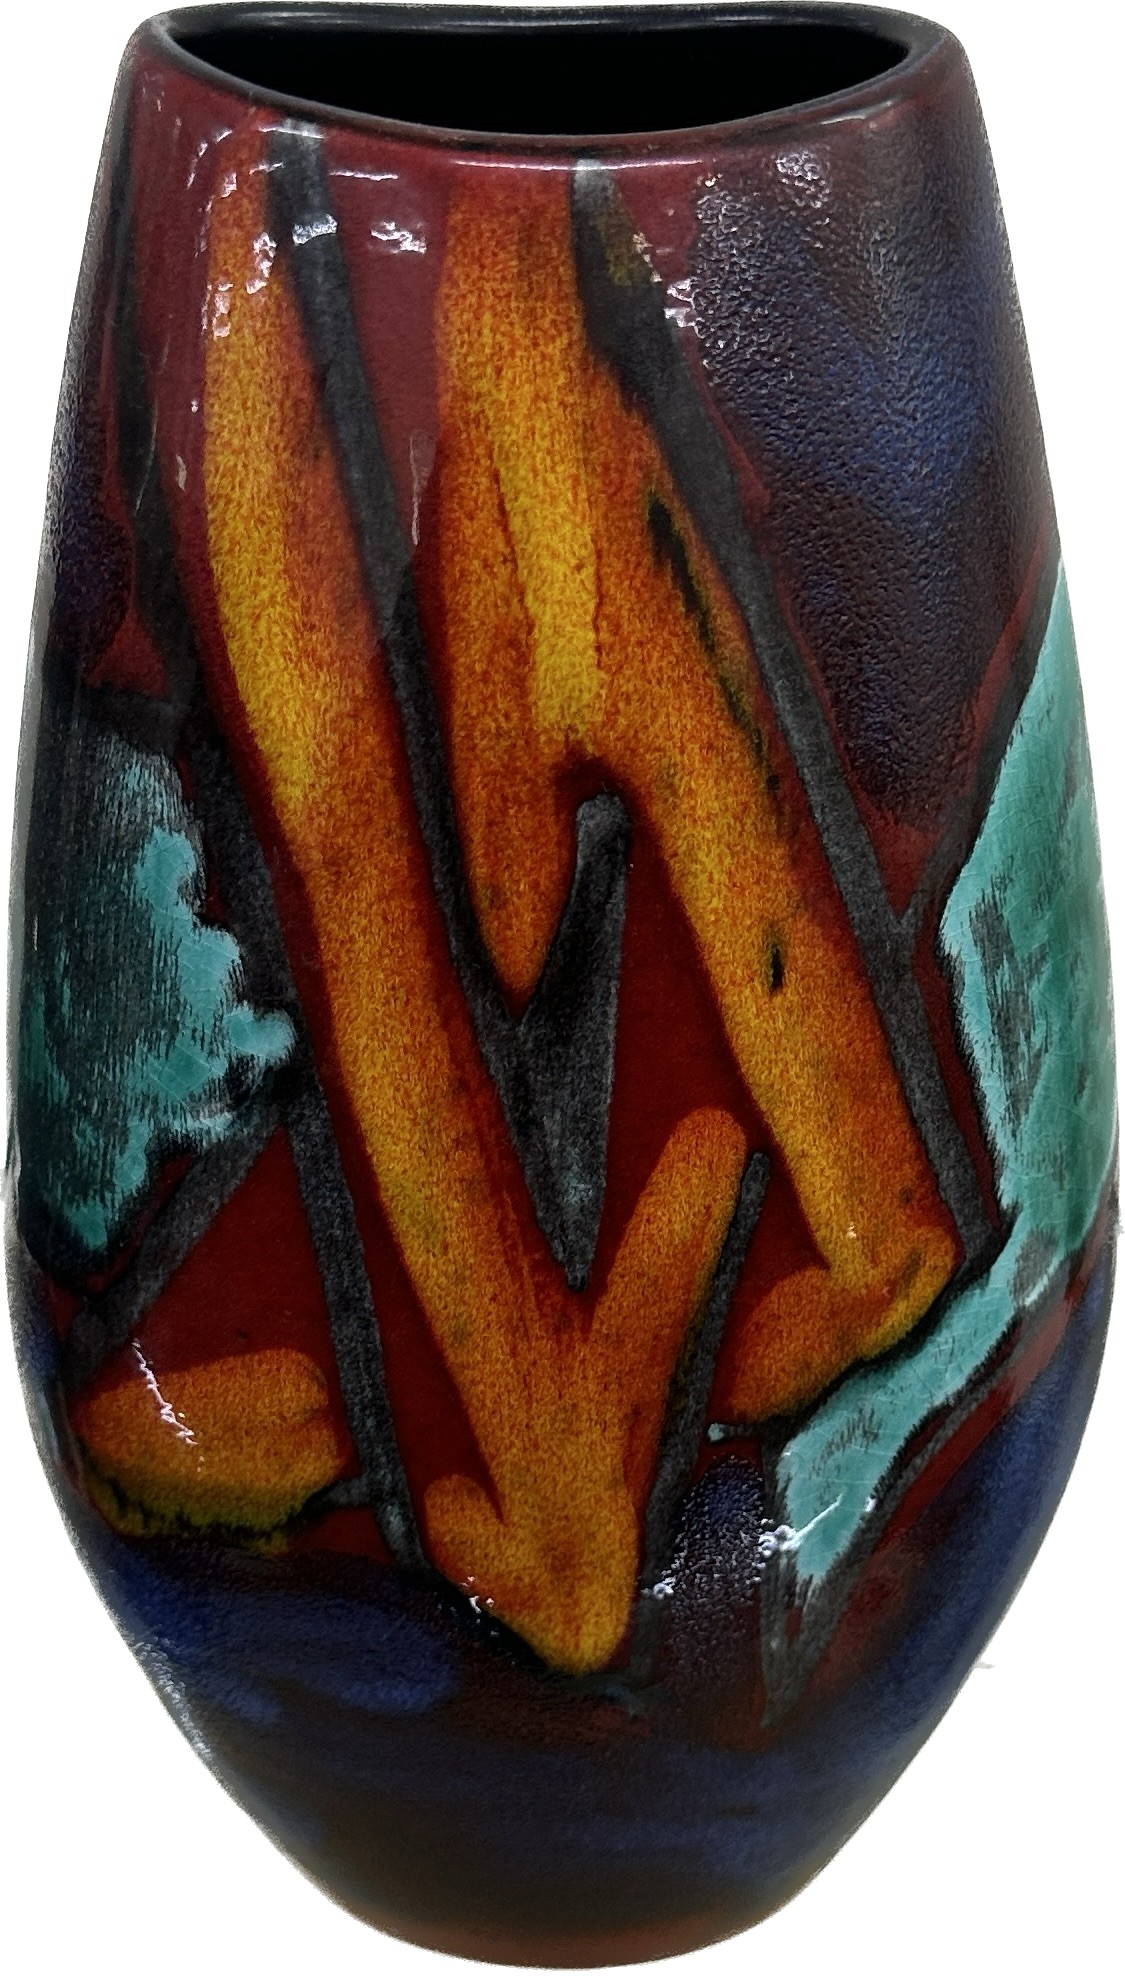 Poole Pottery Graffiti small Manhattan vase, overall height 26cm, good overall condition - Image 2 of 4